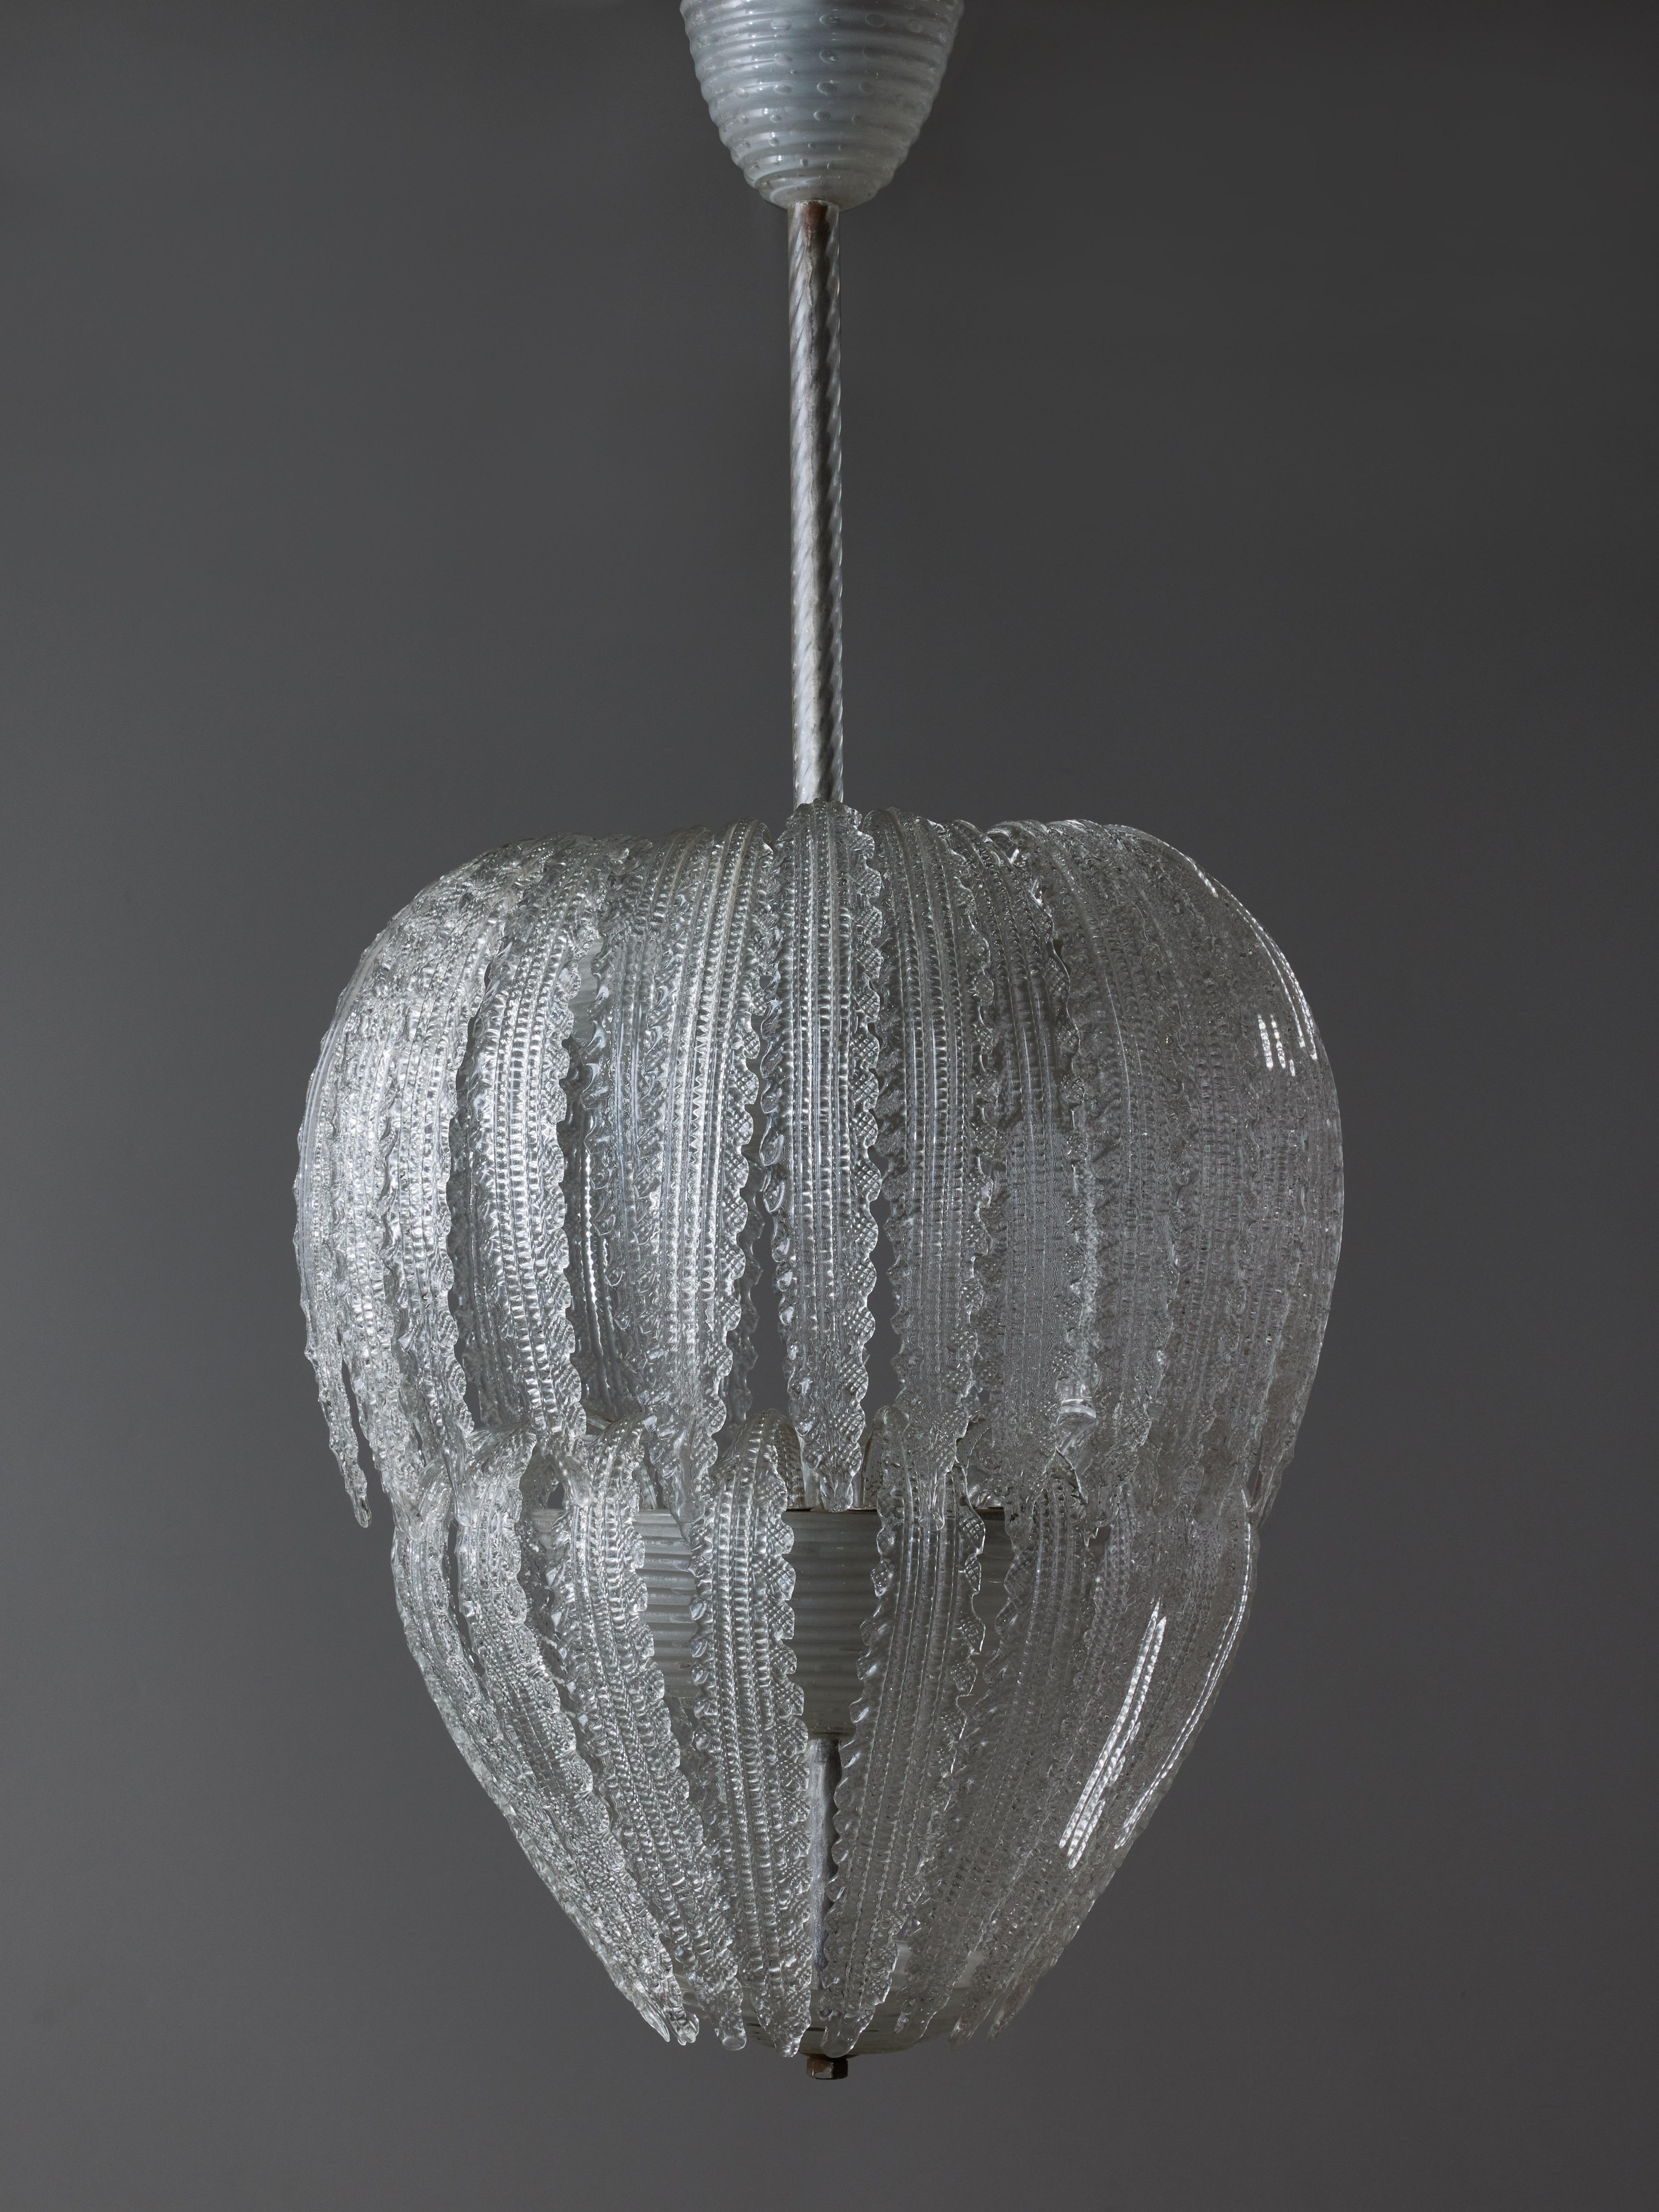 Beautiful example of modern shaped Murano glass chandelier.

This chandelier is made of a central stem with two floors of light, covered with curved leafs, making the chandelier look like a cocoon 